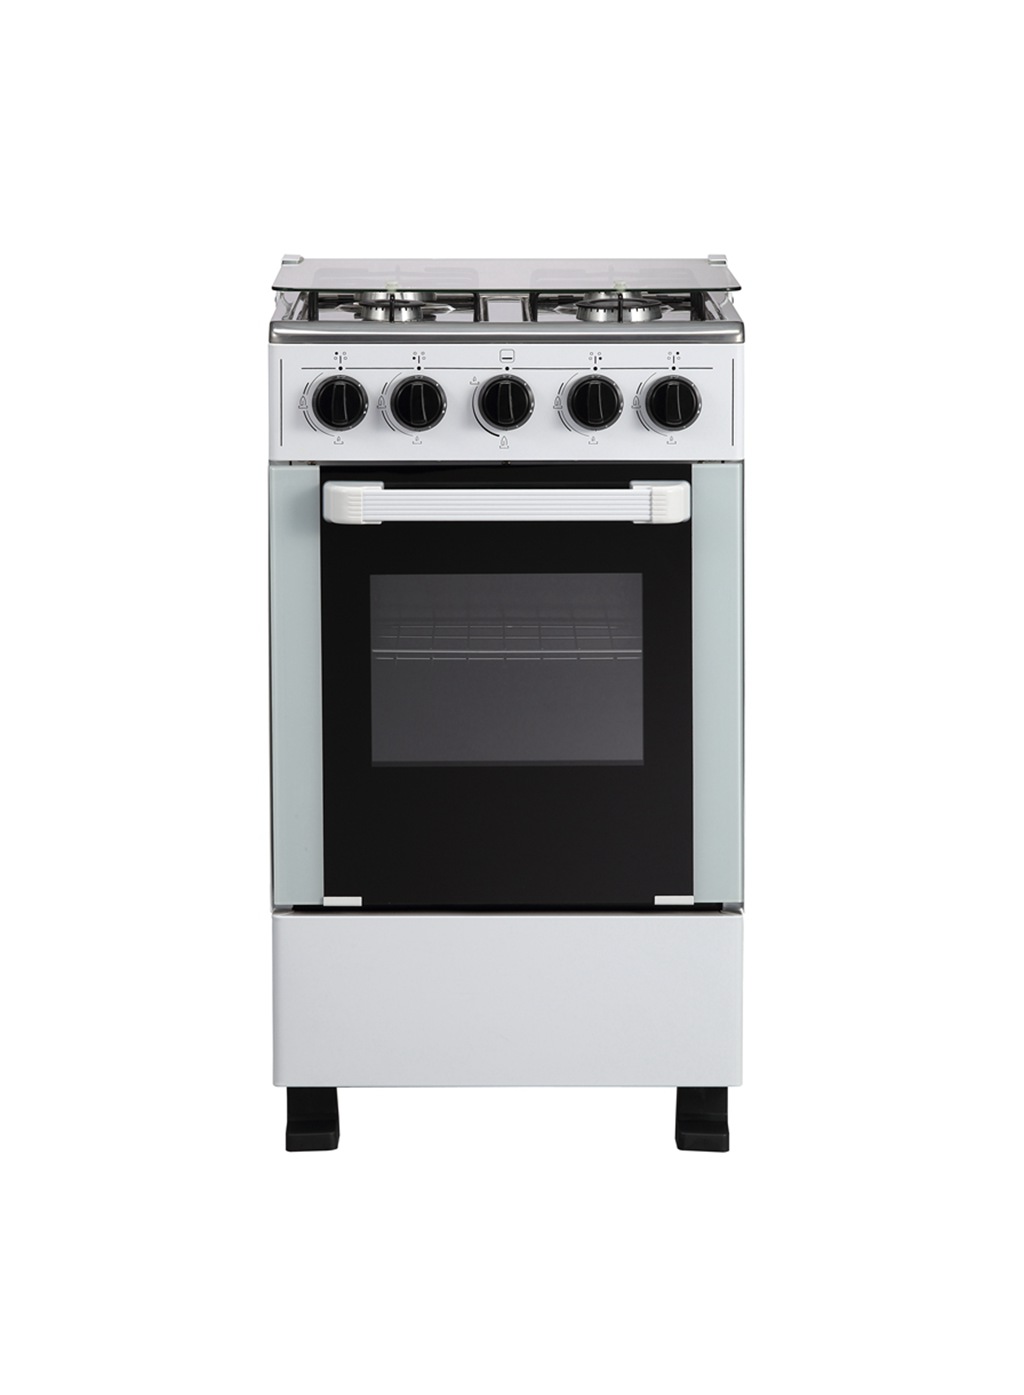 Best Home Appliances Gas Oven Range with 4 Burners